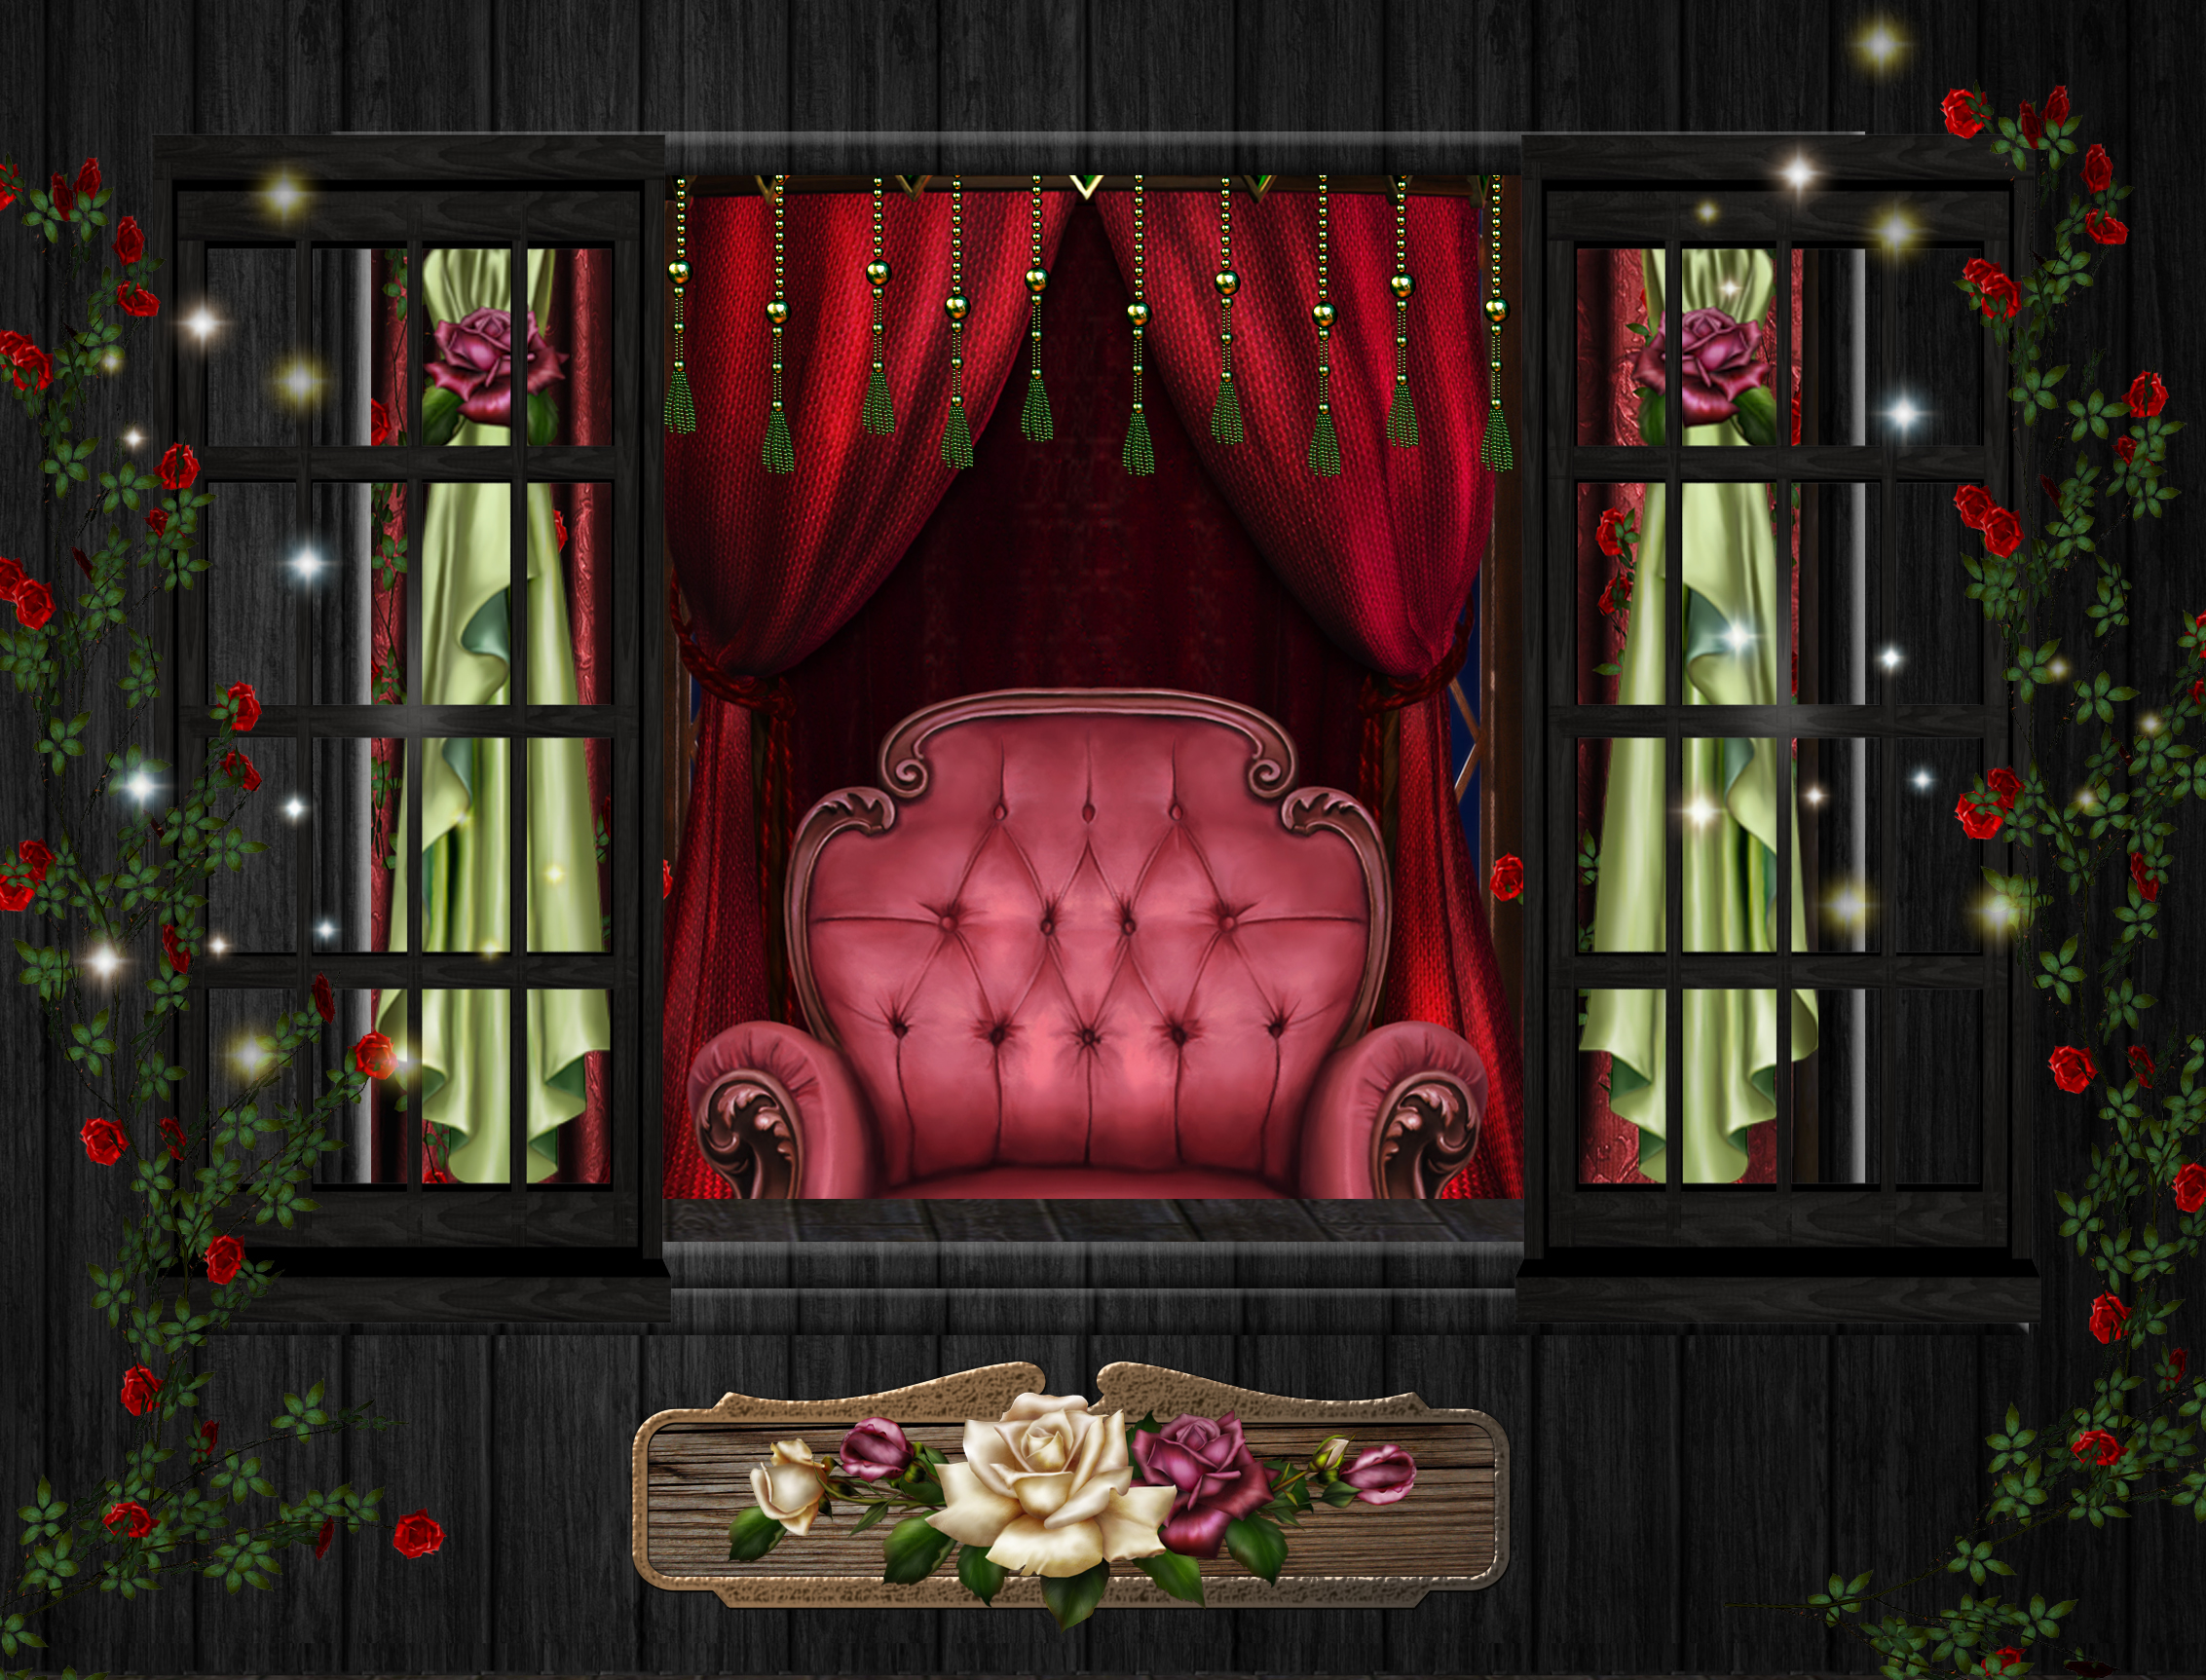 chair, red rose, artistic, window, curtain, pink rose